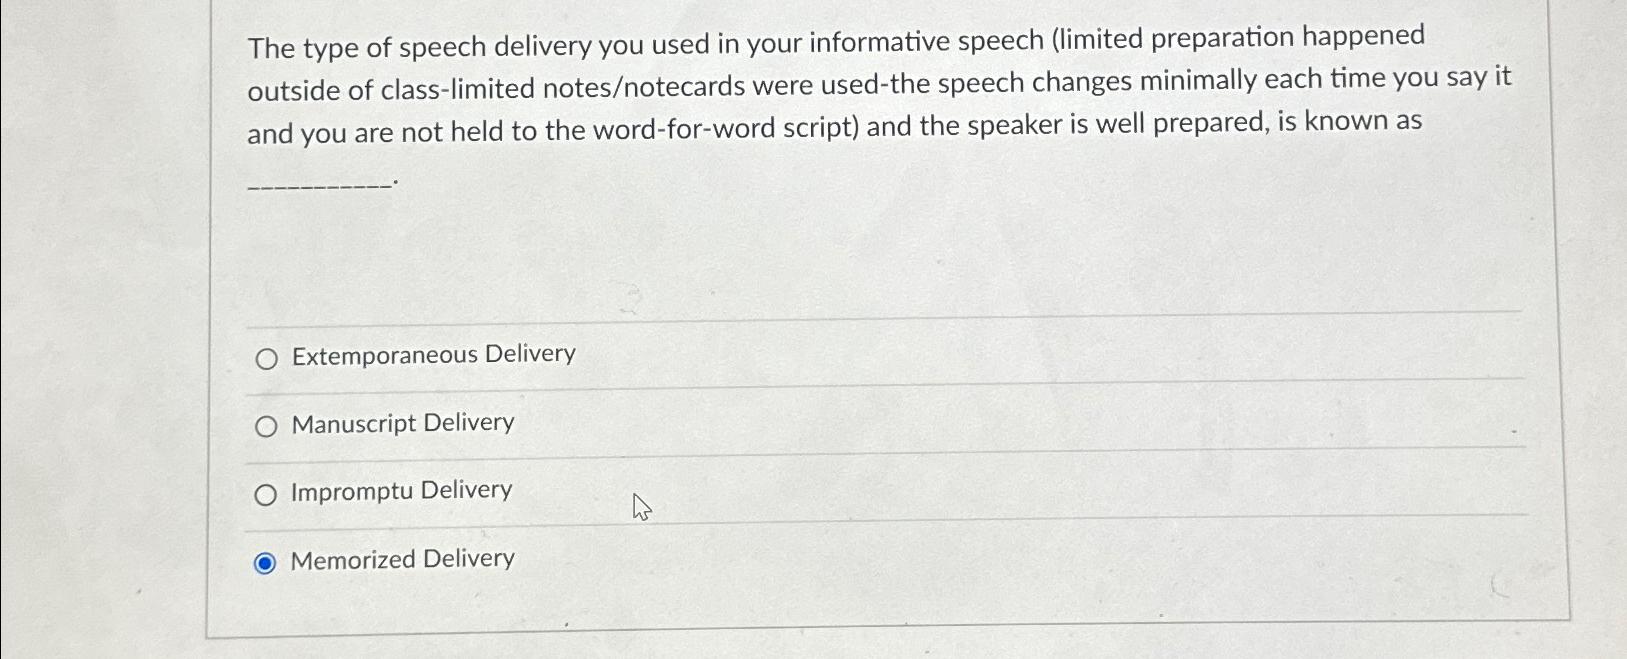 The type of speech delivery you used in your informative speech (limited preparation happened outside of